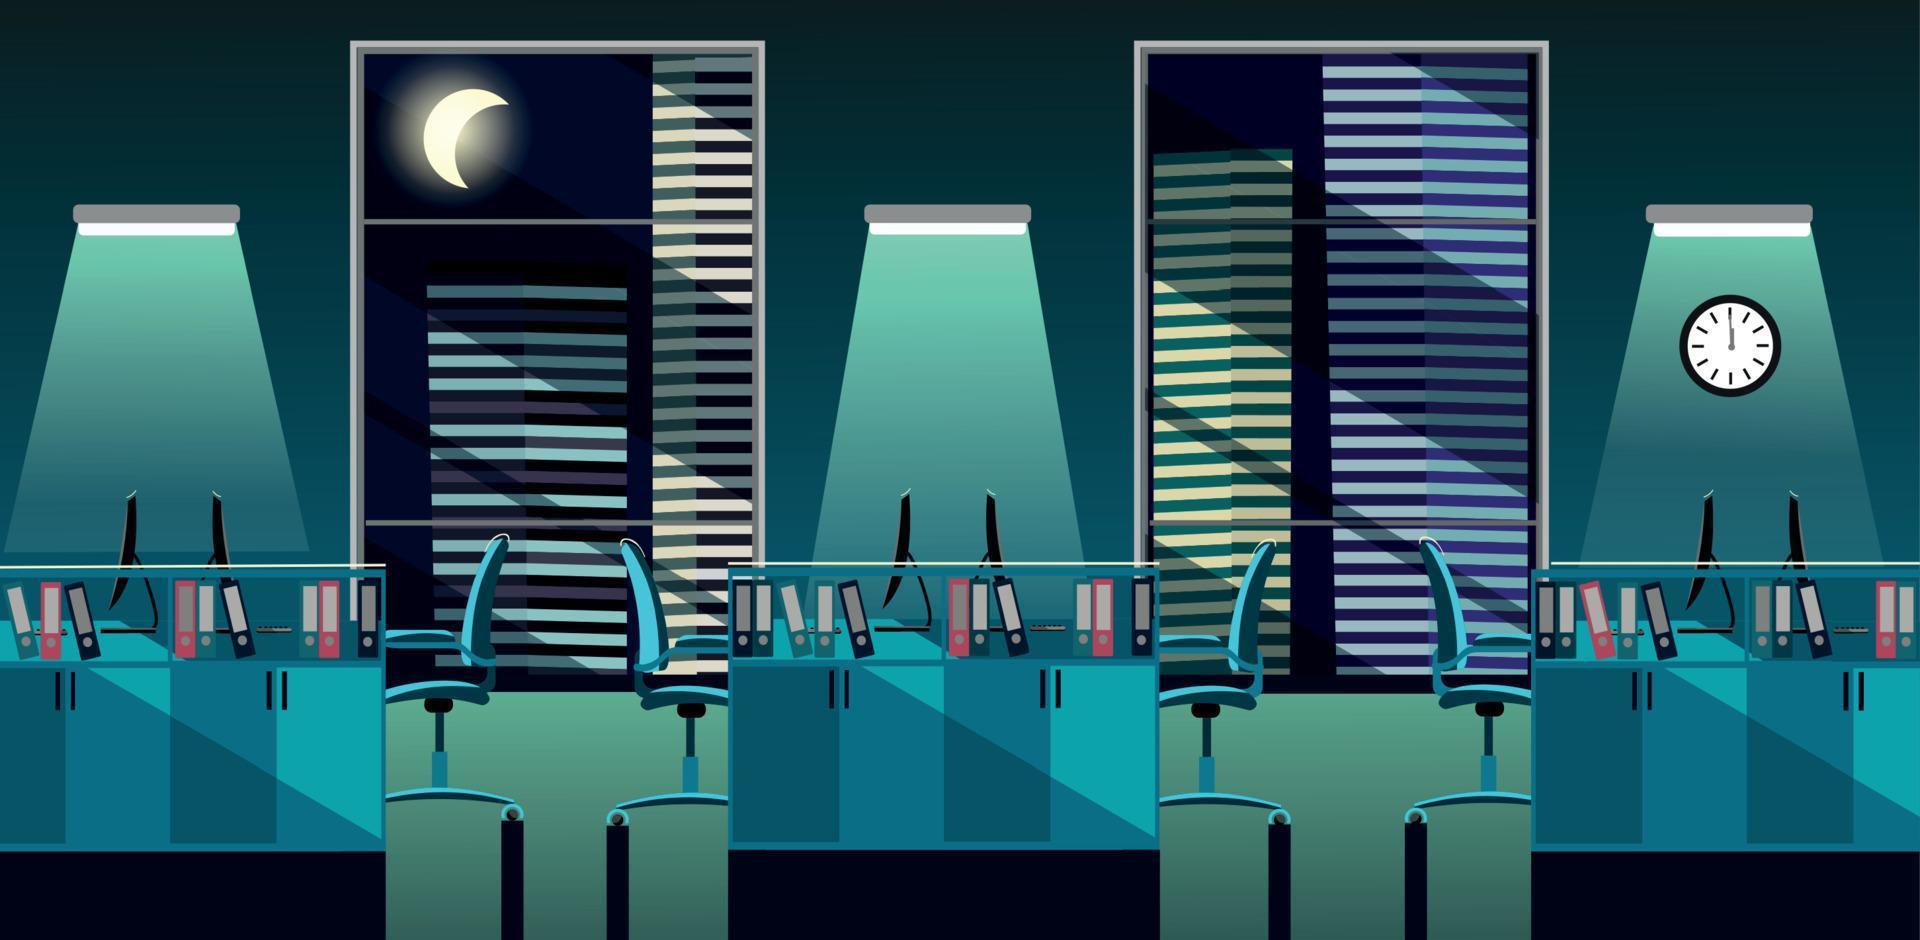 Flat vector illustration of modern office room interior with large windows in skyscraper with tables and PC at night. Open space for 6 people. Order on tables, document folders, turquoise moon light